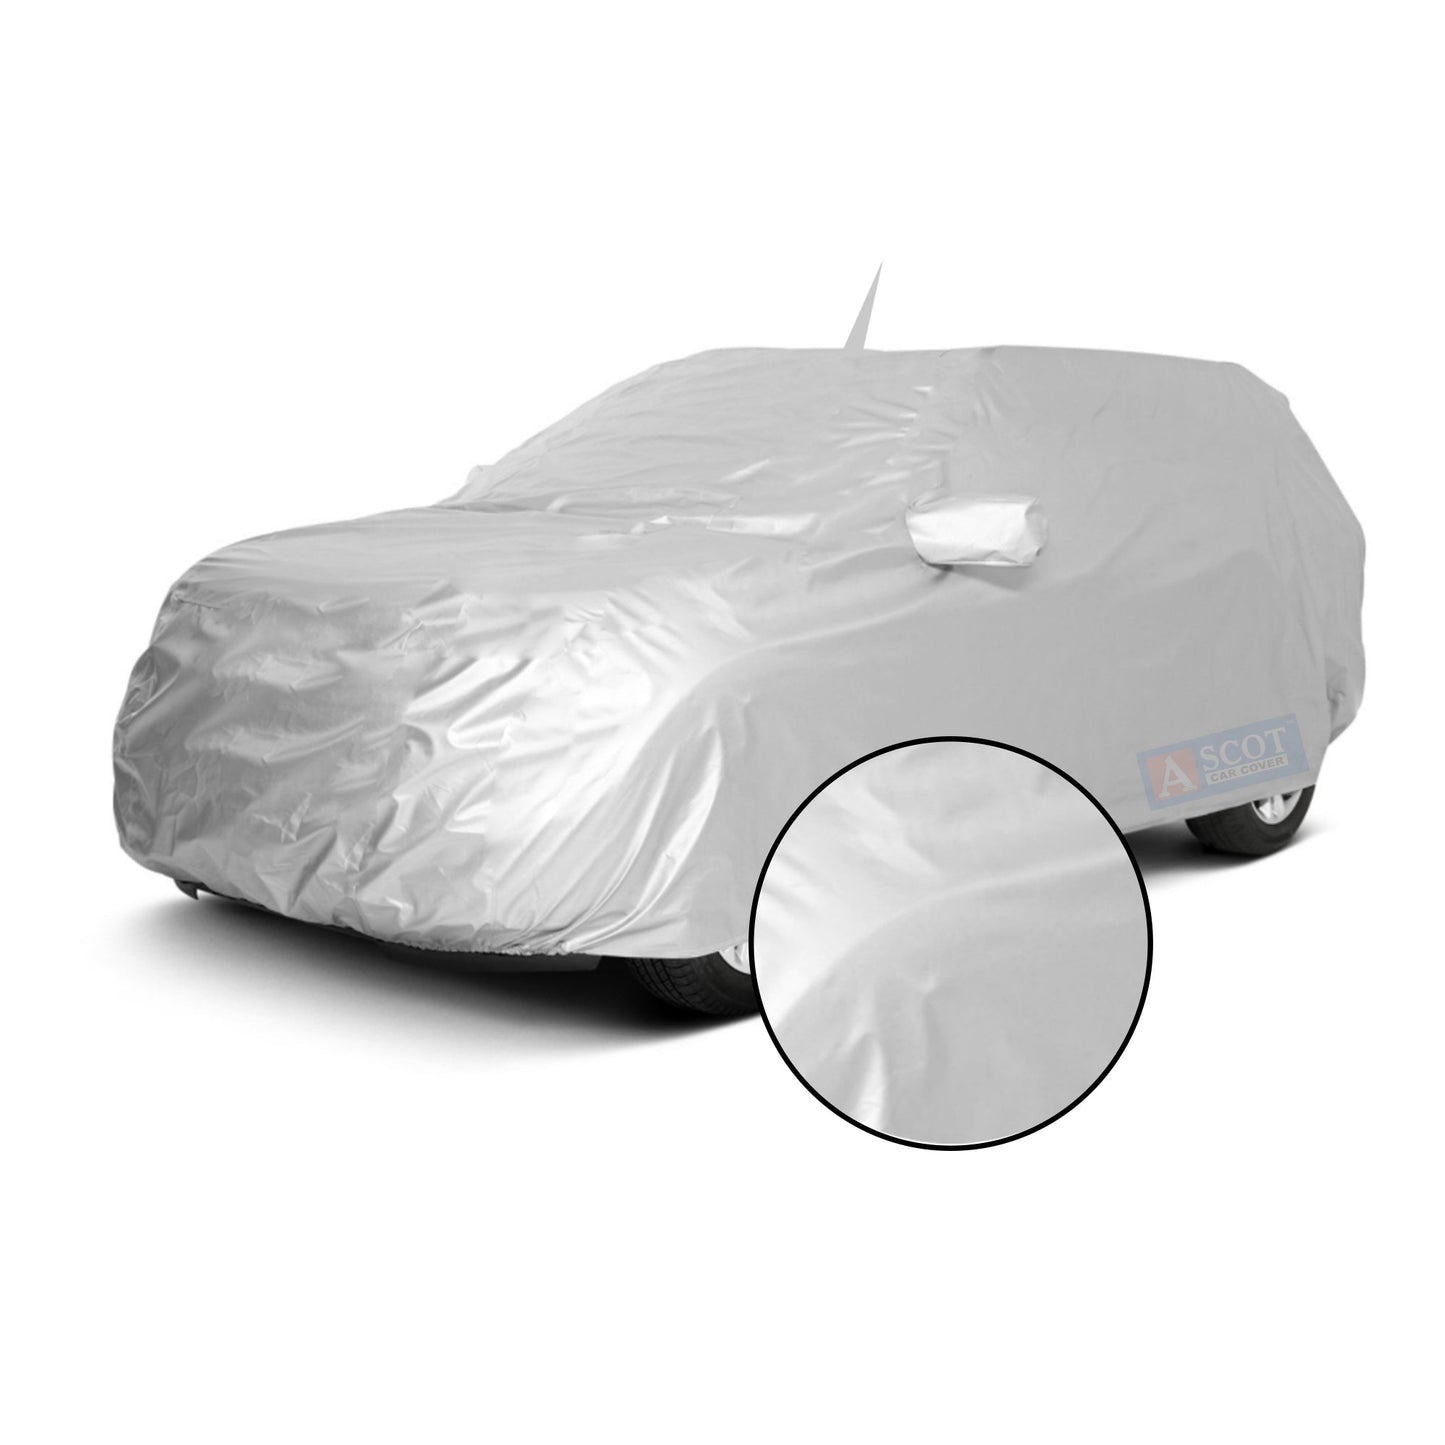 Ascot Mahindra KUV 100 NXT Car Body Cover Dust Proof, Trippel Stitched